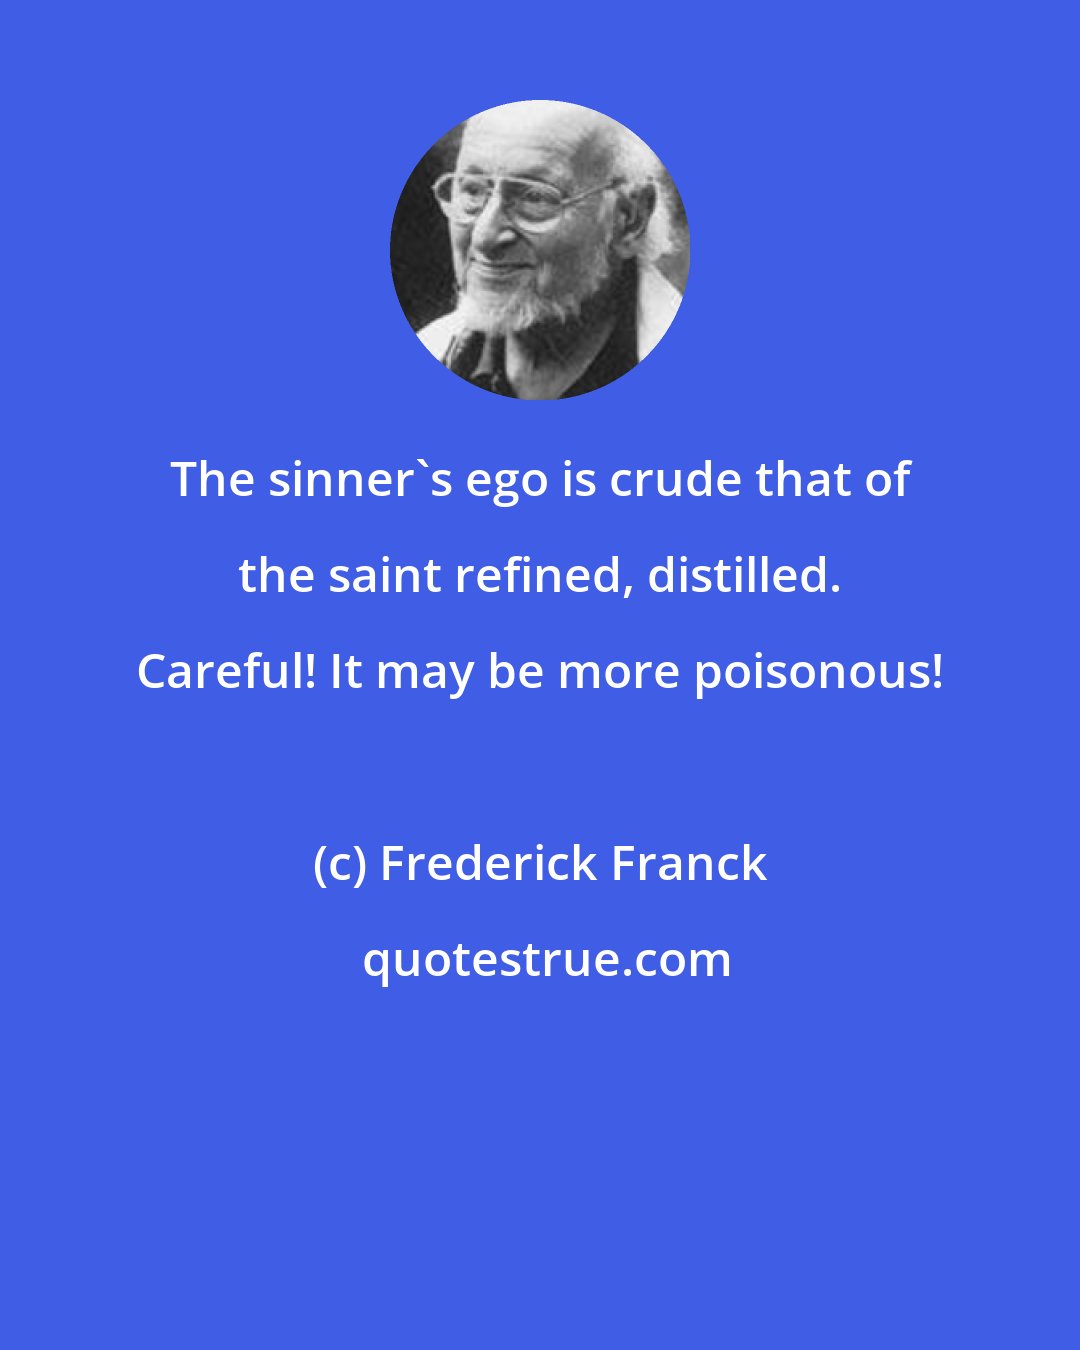 Frederick Franck: The sinner's ego is crude that of the saint refined, distilled. Careful! It may be more poisonous!